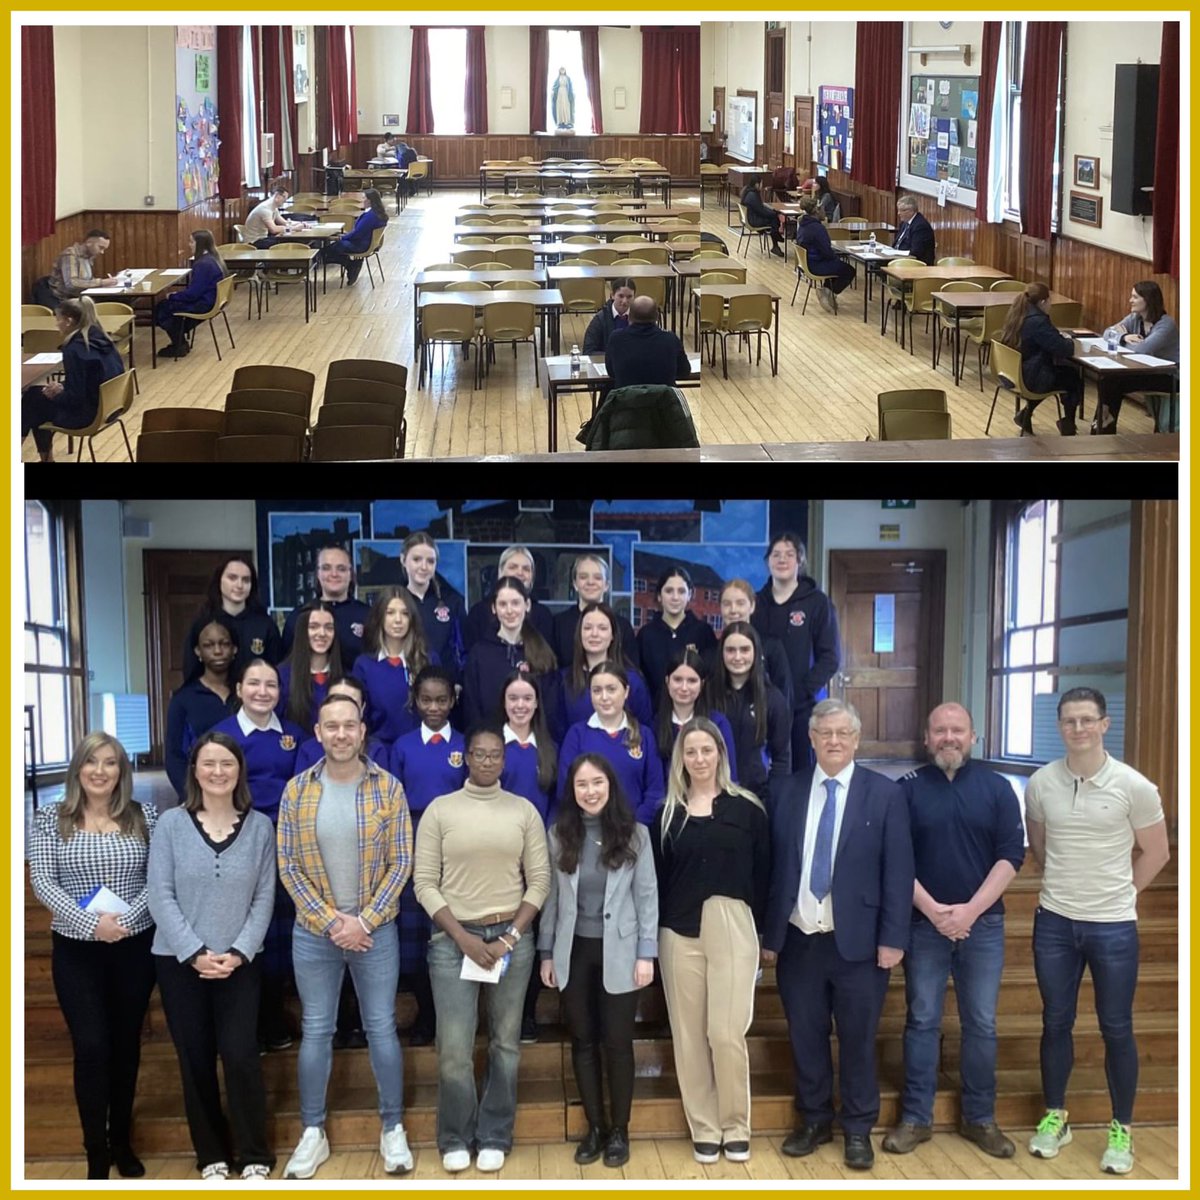 Dundalk Chamber of commerce School Mentorship Programme set up Mock Interviews in St Vincent’s Secondary School. Transition Year students met with local business professionals and completed interviews based on their professional, academic and professional experience to date.